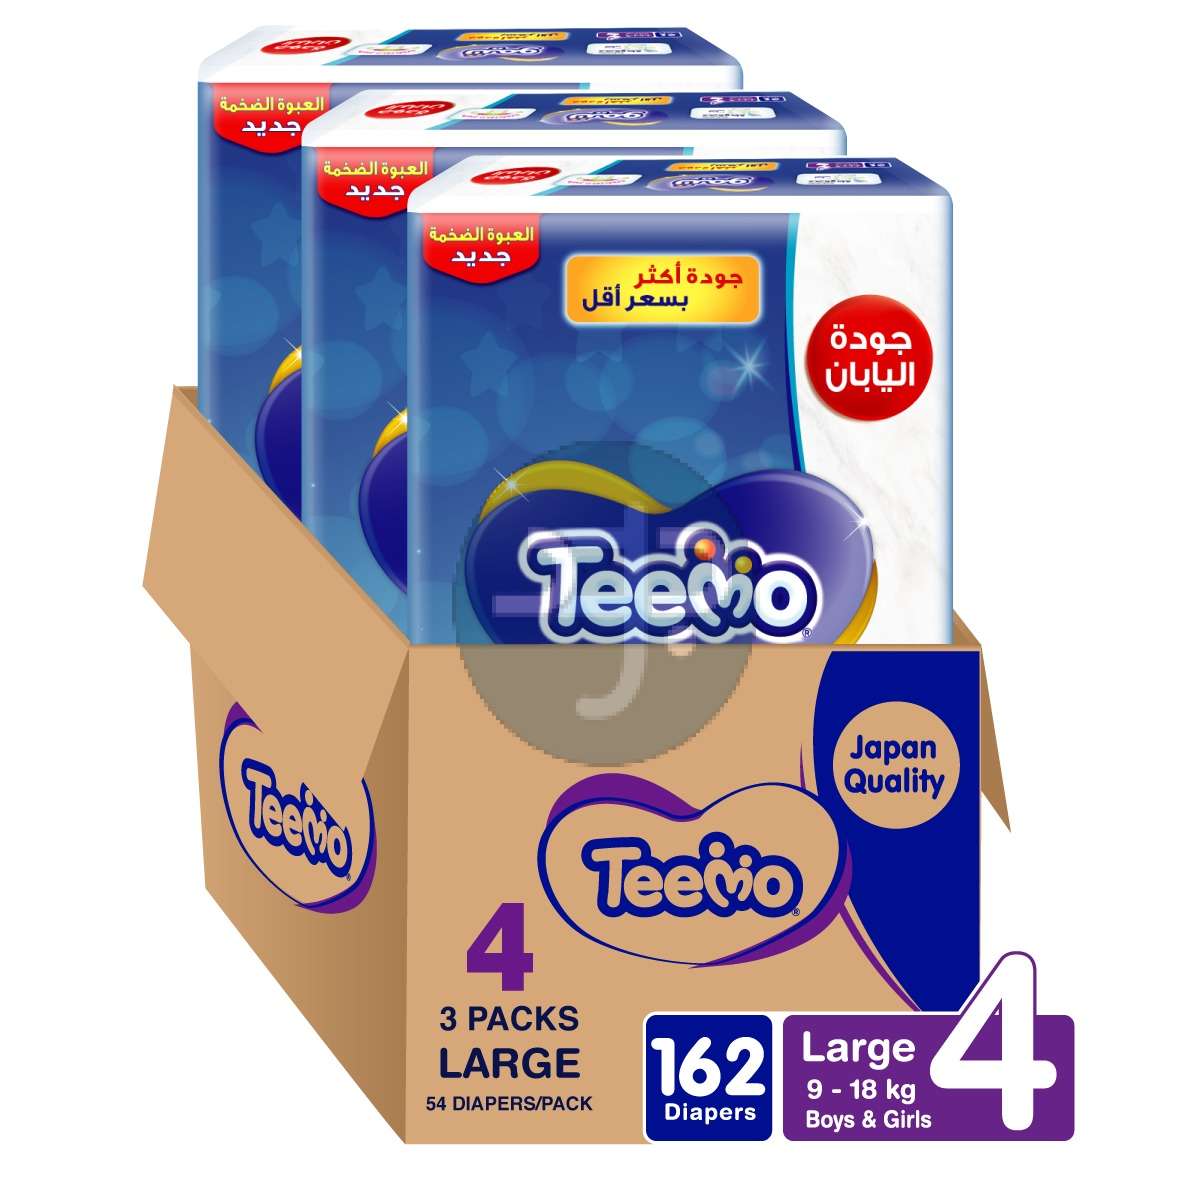 Product-Teemo Baby Diapers, Size 4, Large, 9-18 kg, Mega Box, 162 Diapers